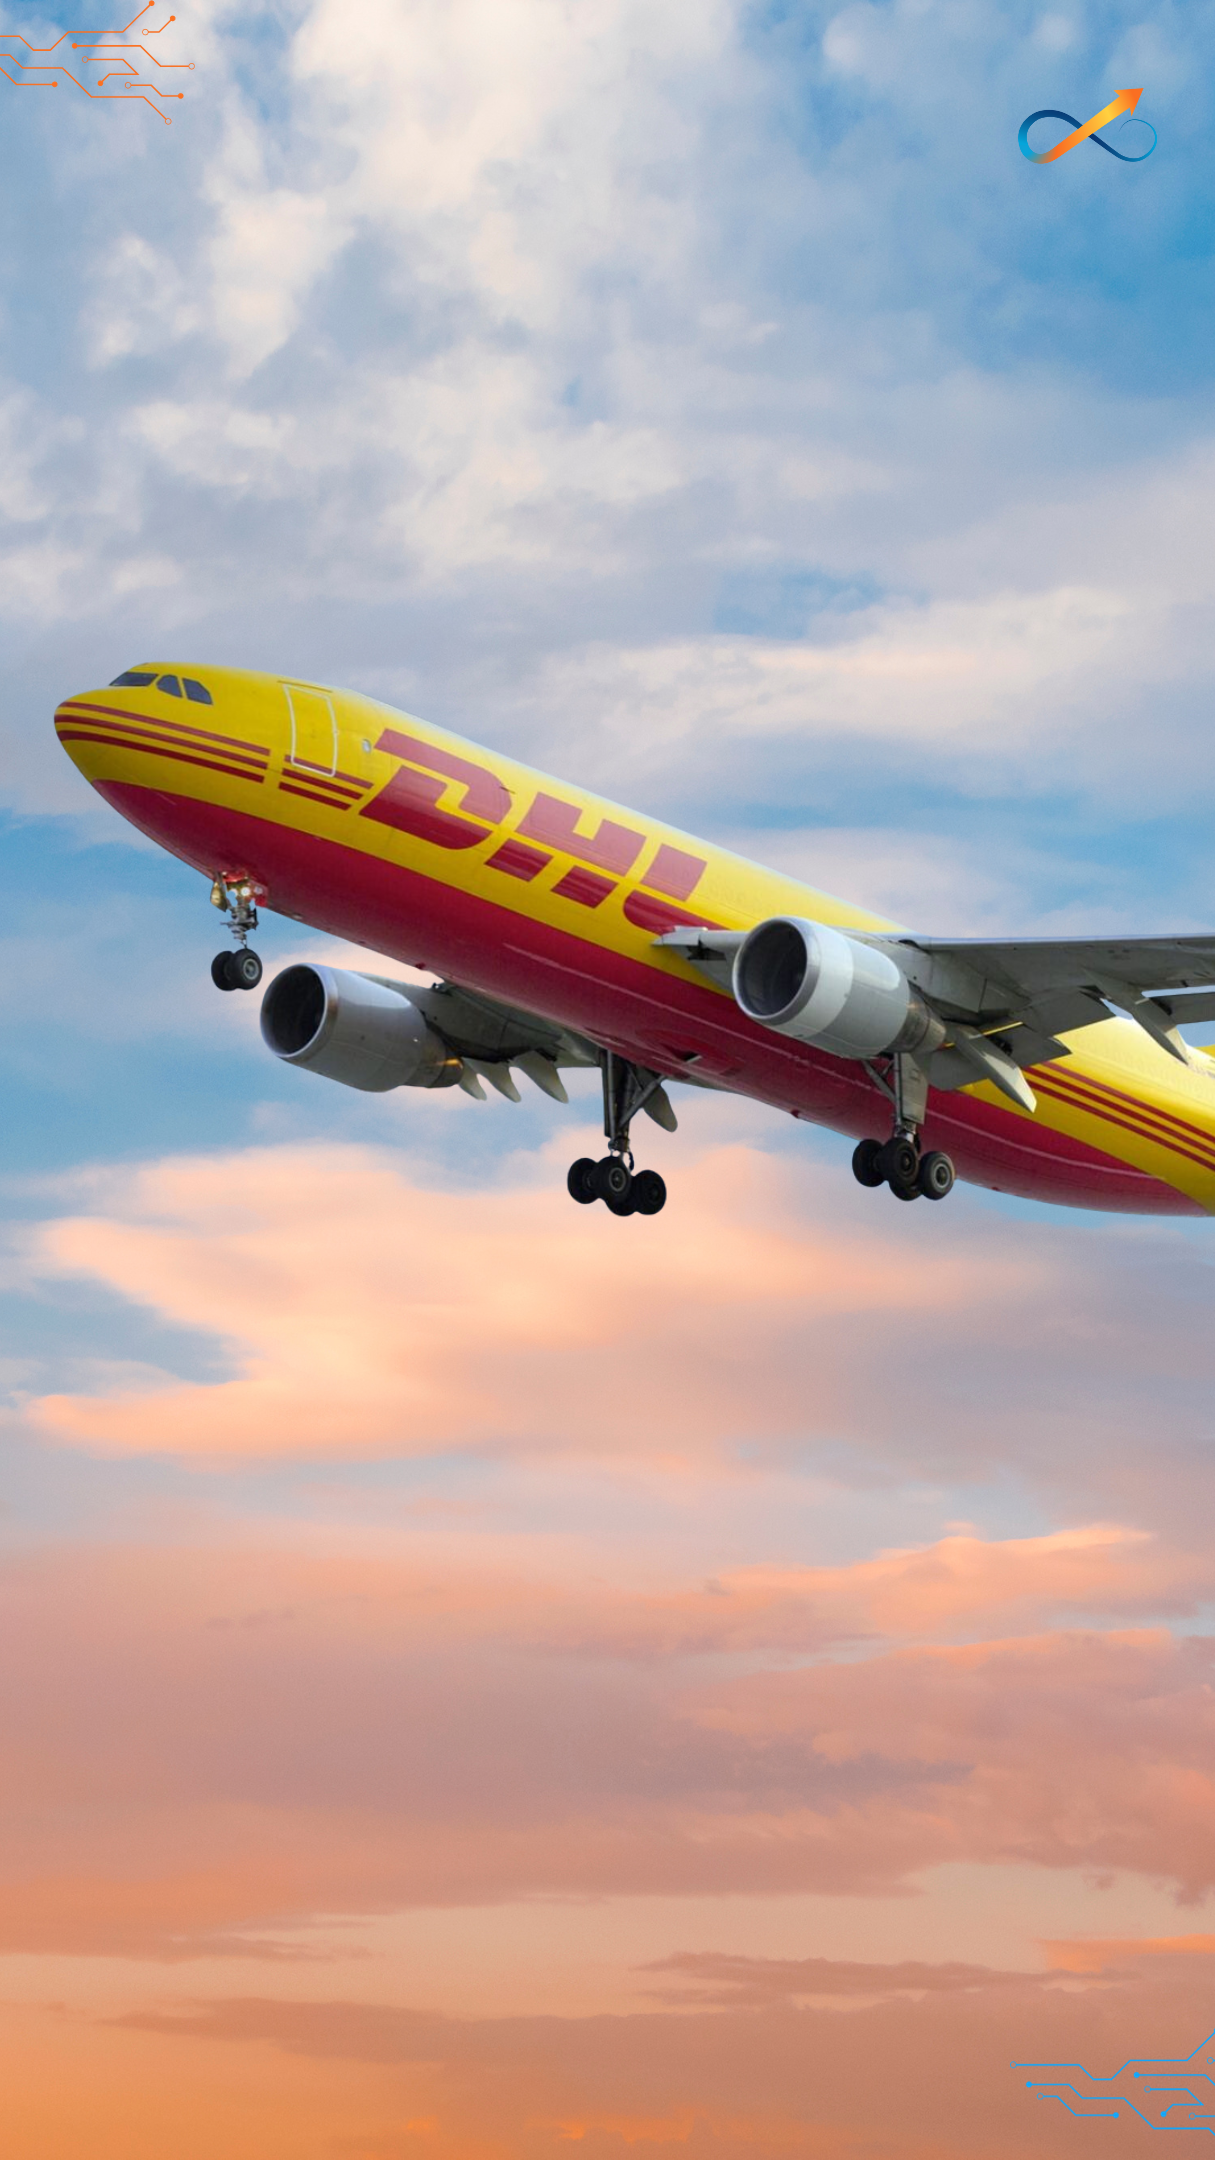 DHL: Rapid IT Infrastructure Recovery for a Global Logistics Leader